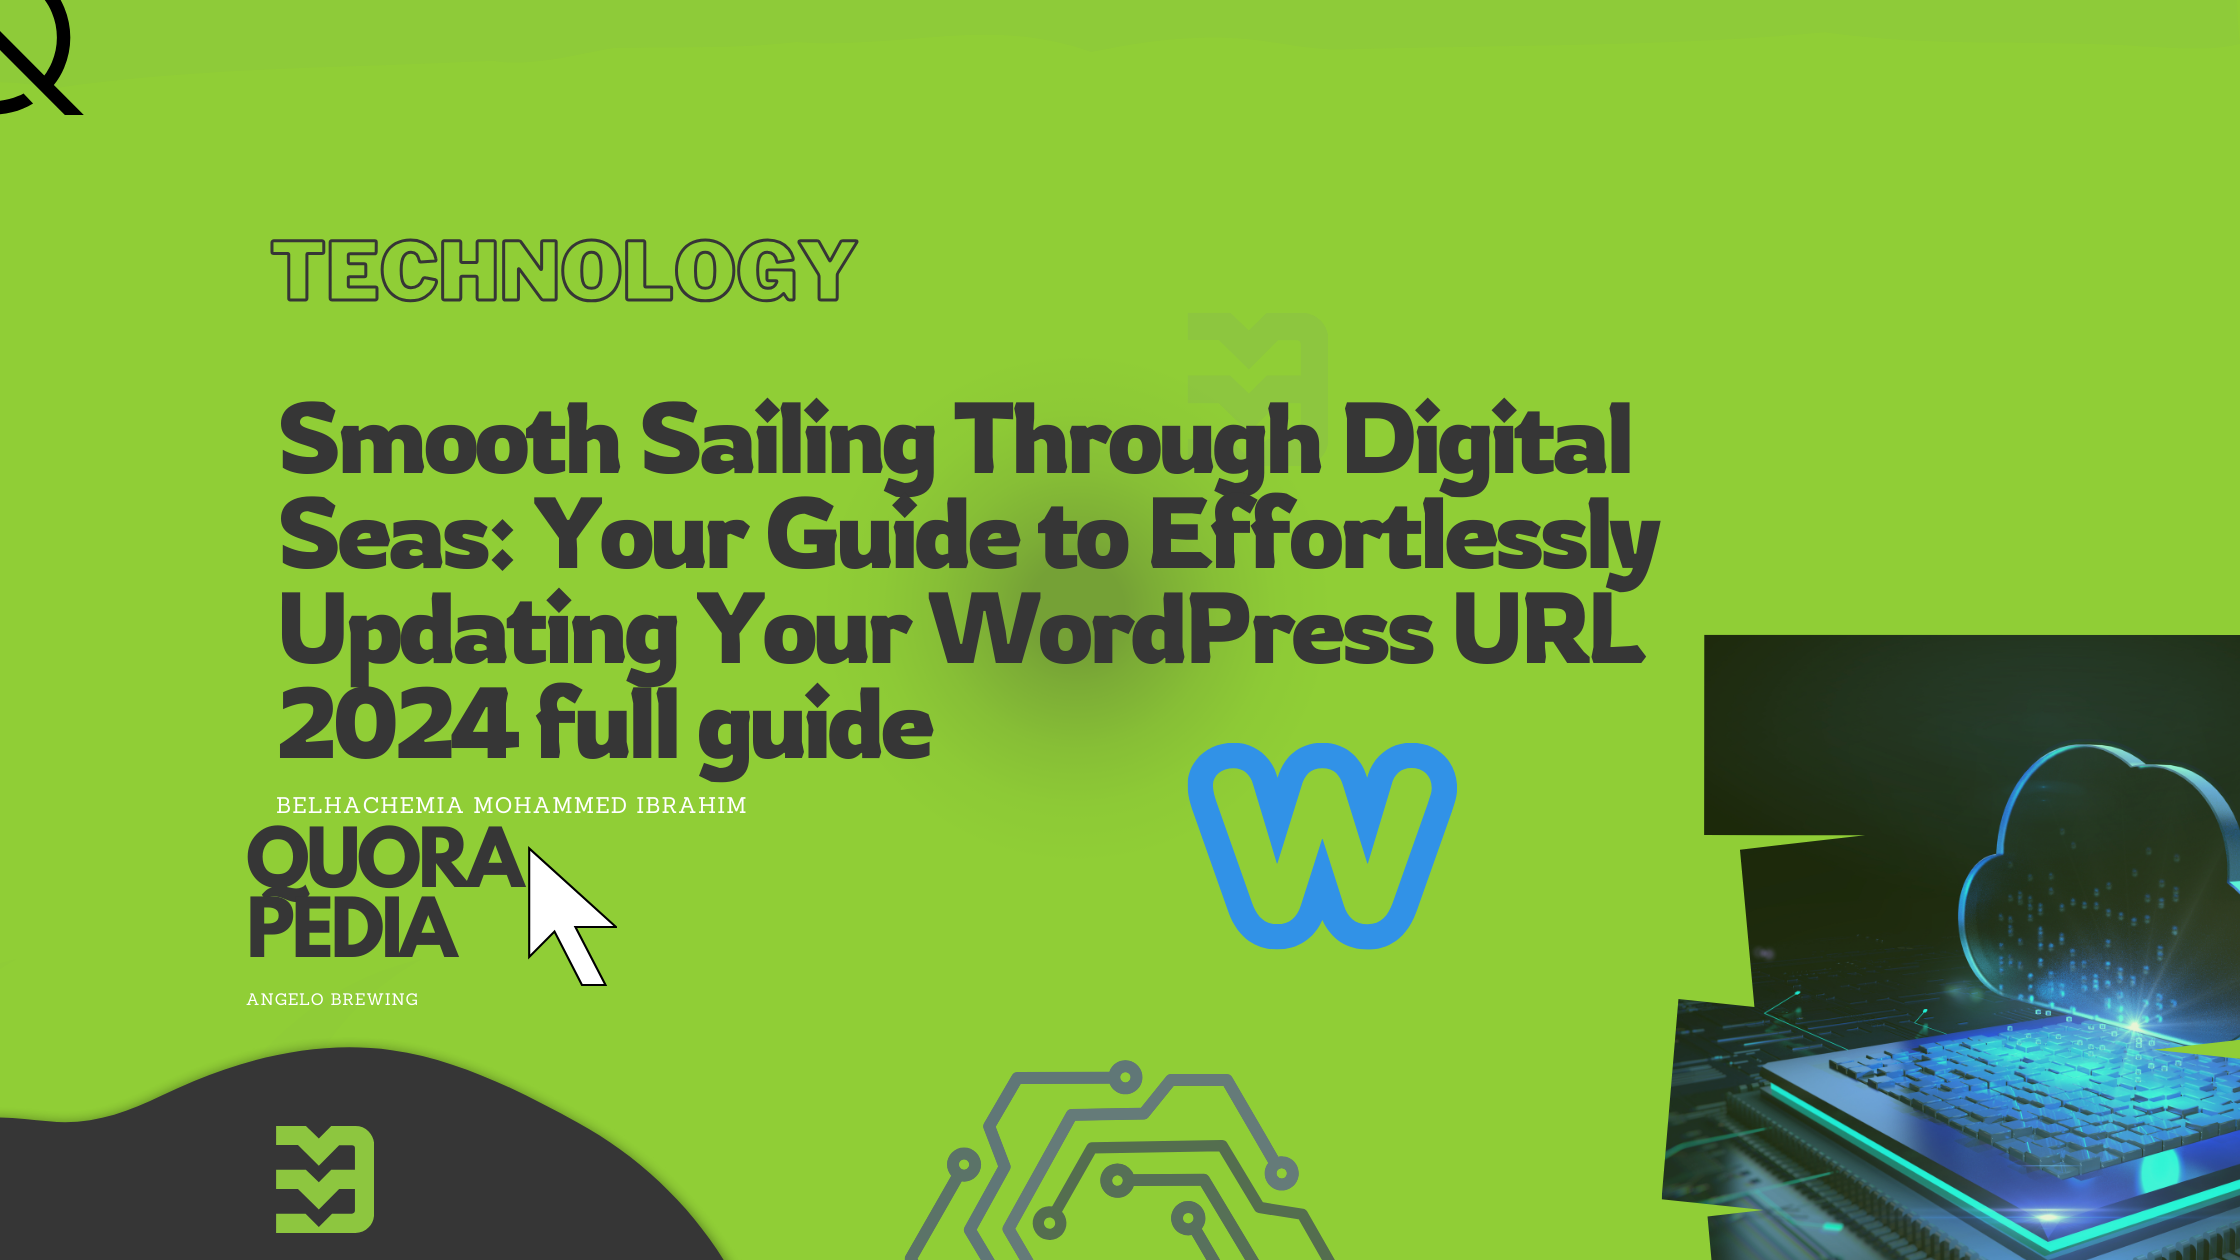 Smooth Sailing Through Digital Seas: Your Guide to Effortlessly Updating Your WordPress URL 2024 Full Guide